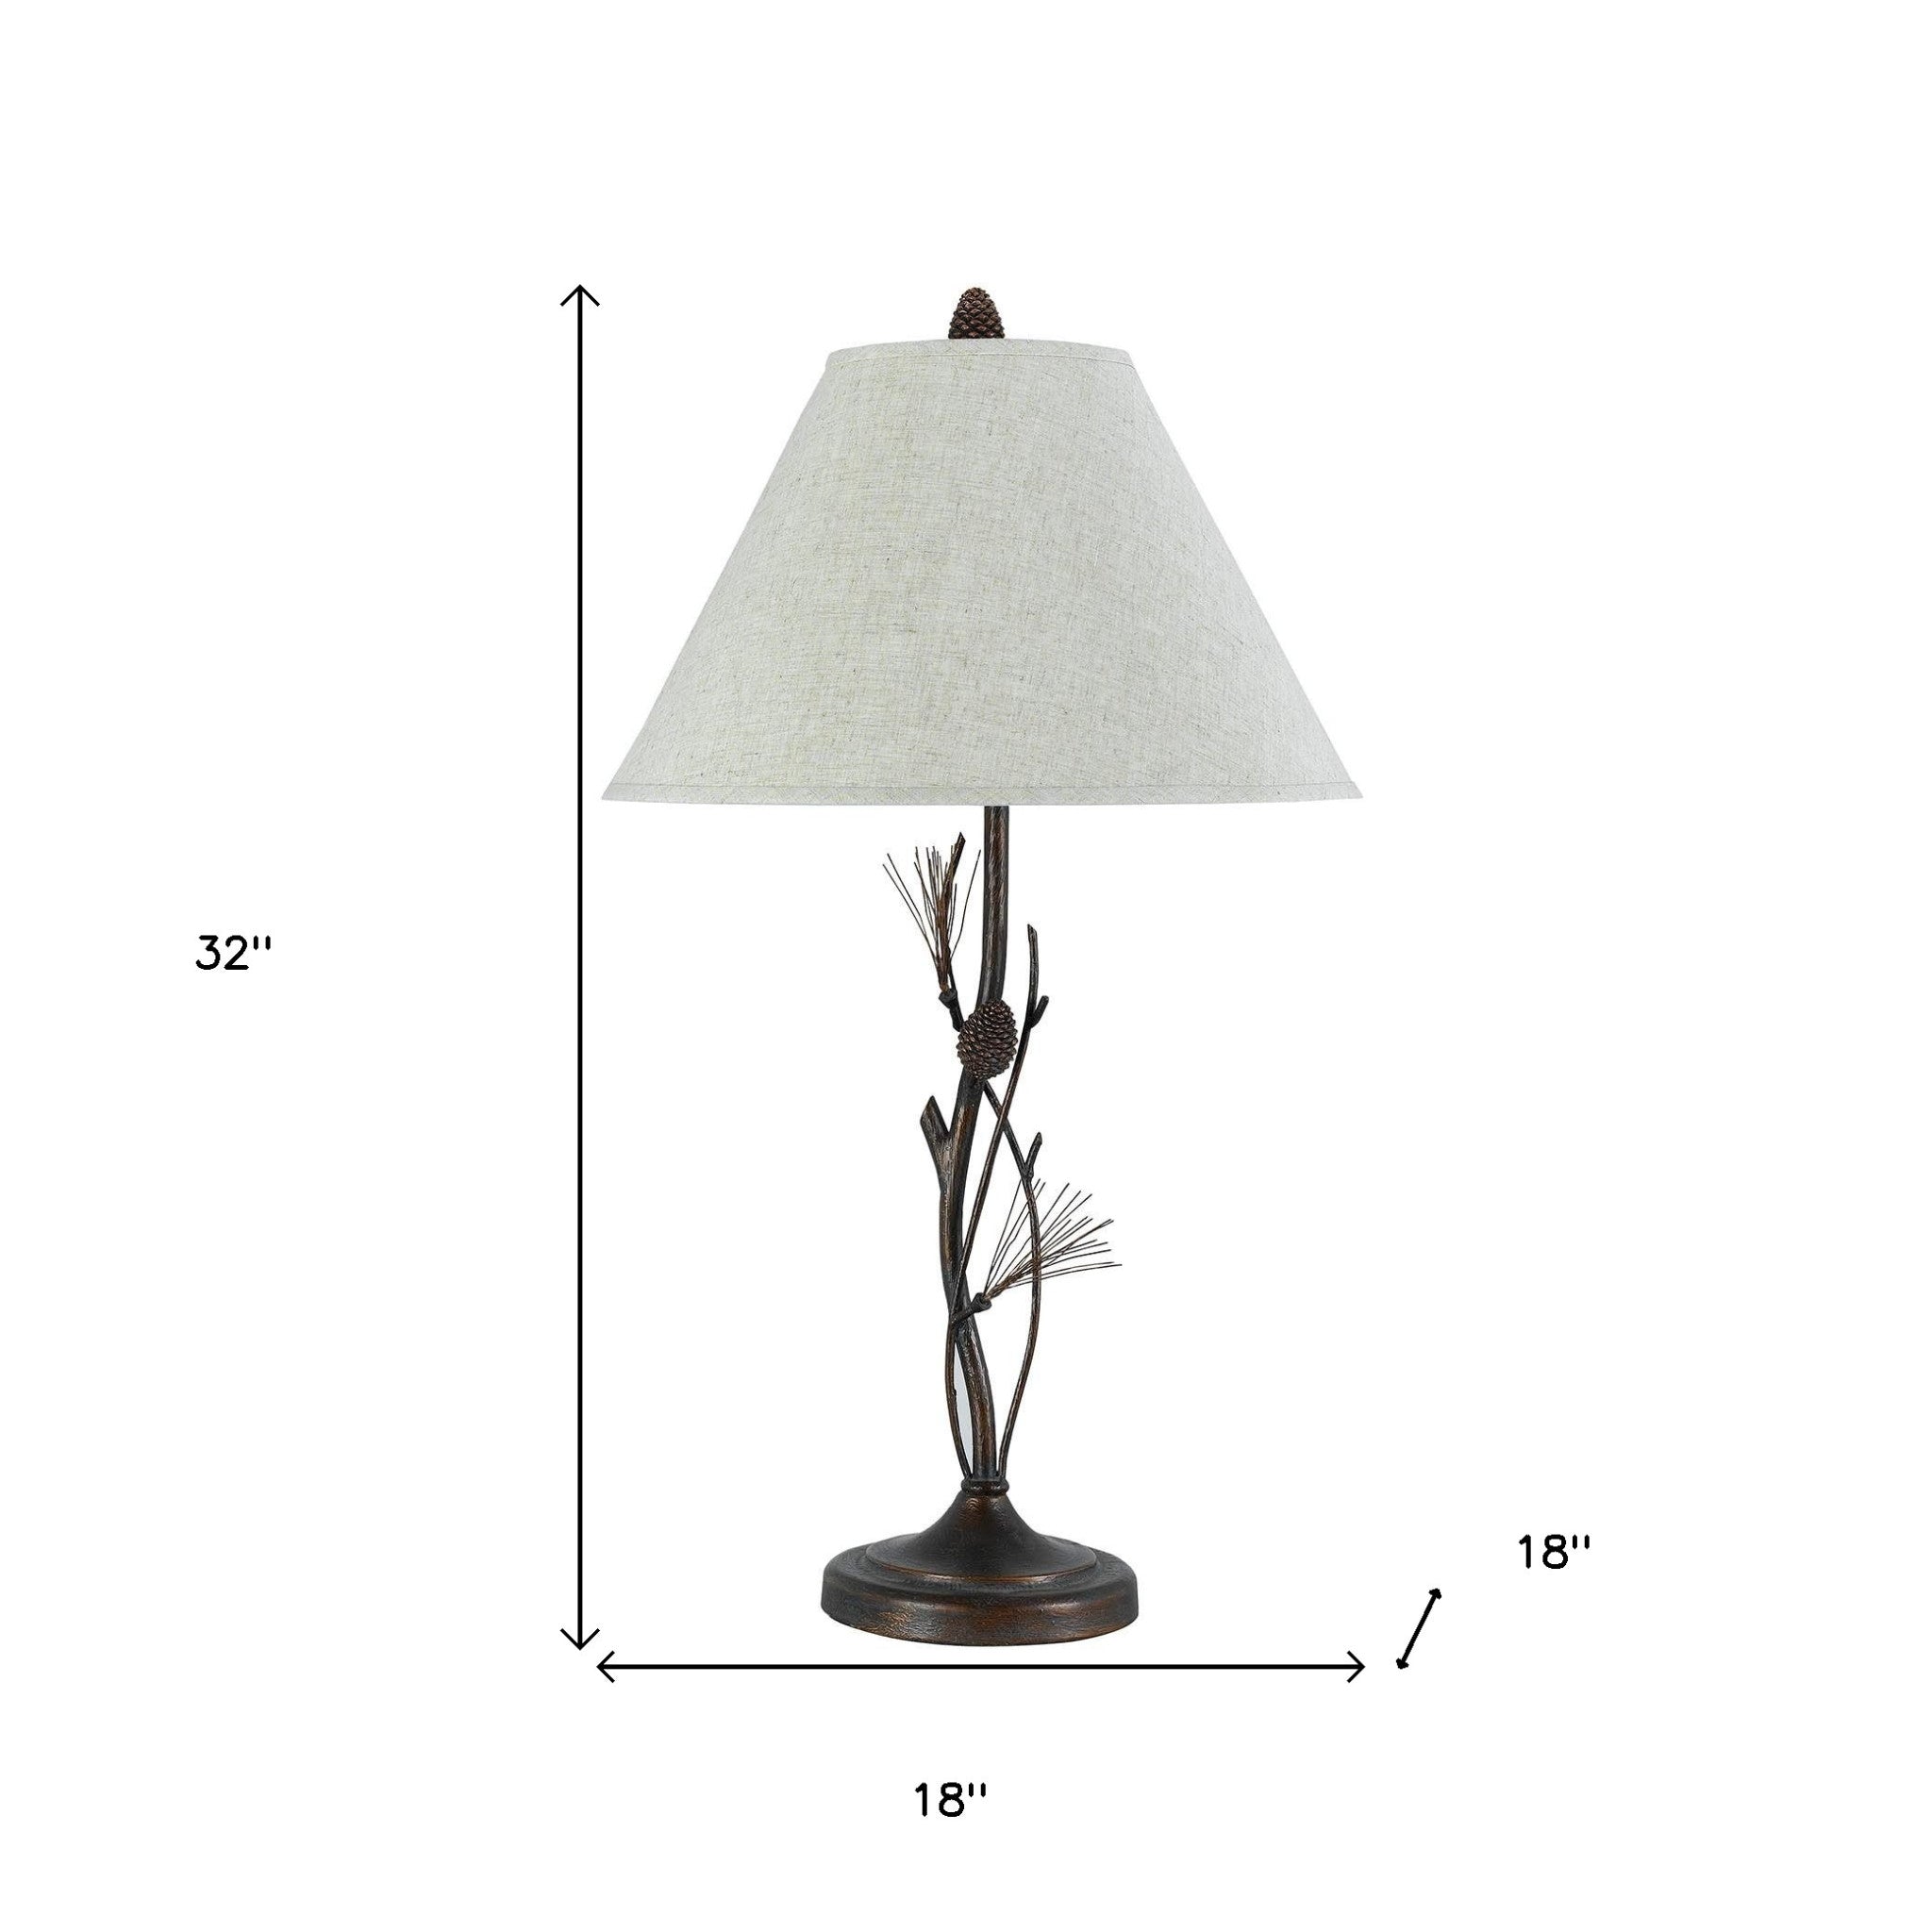 32" Rust Metal Table Lamp With Gray Empire Shade